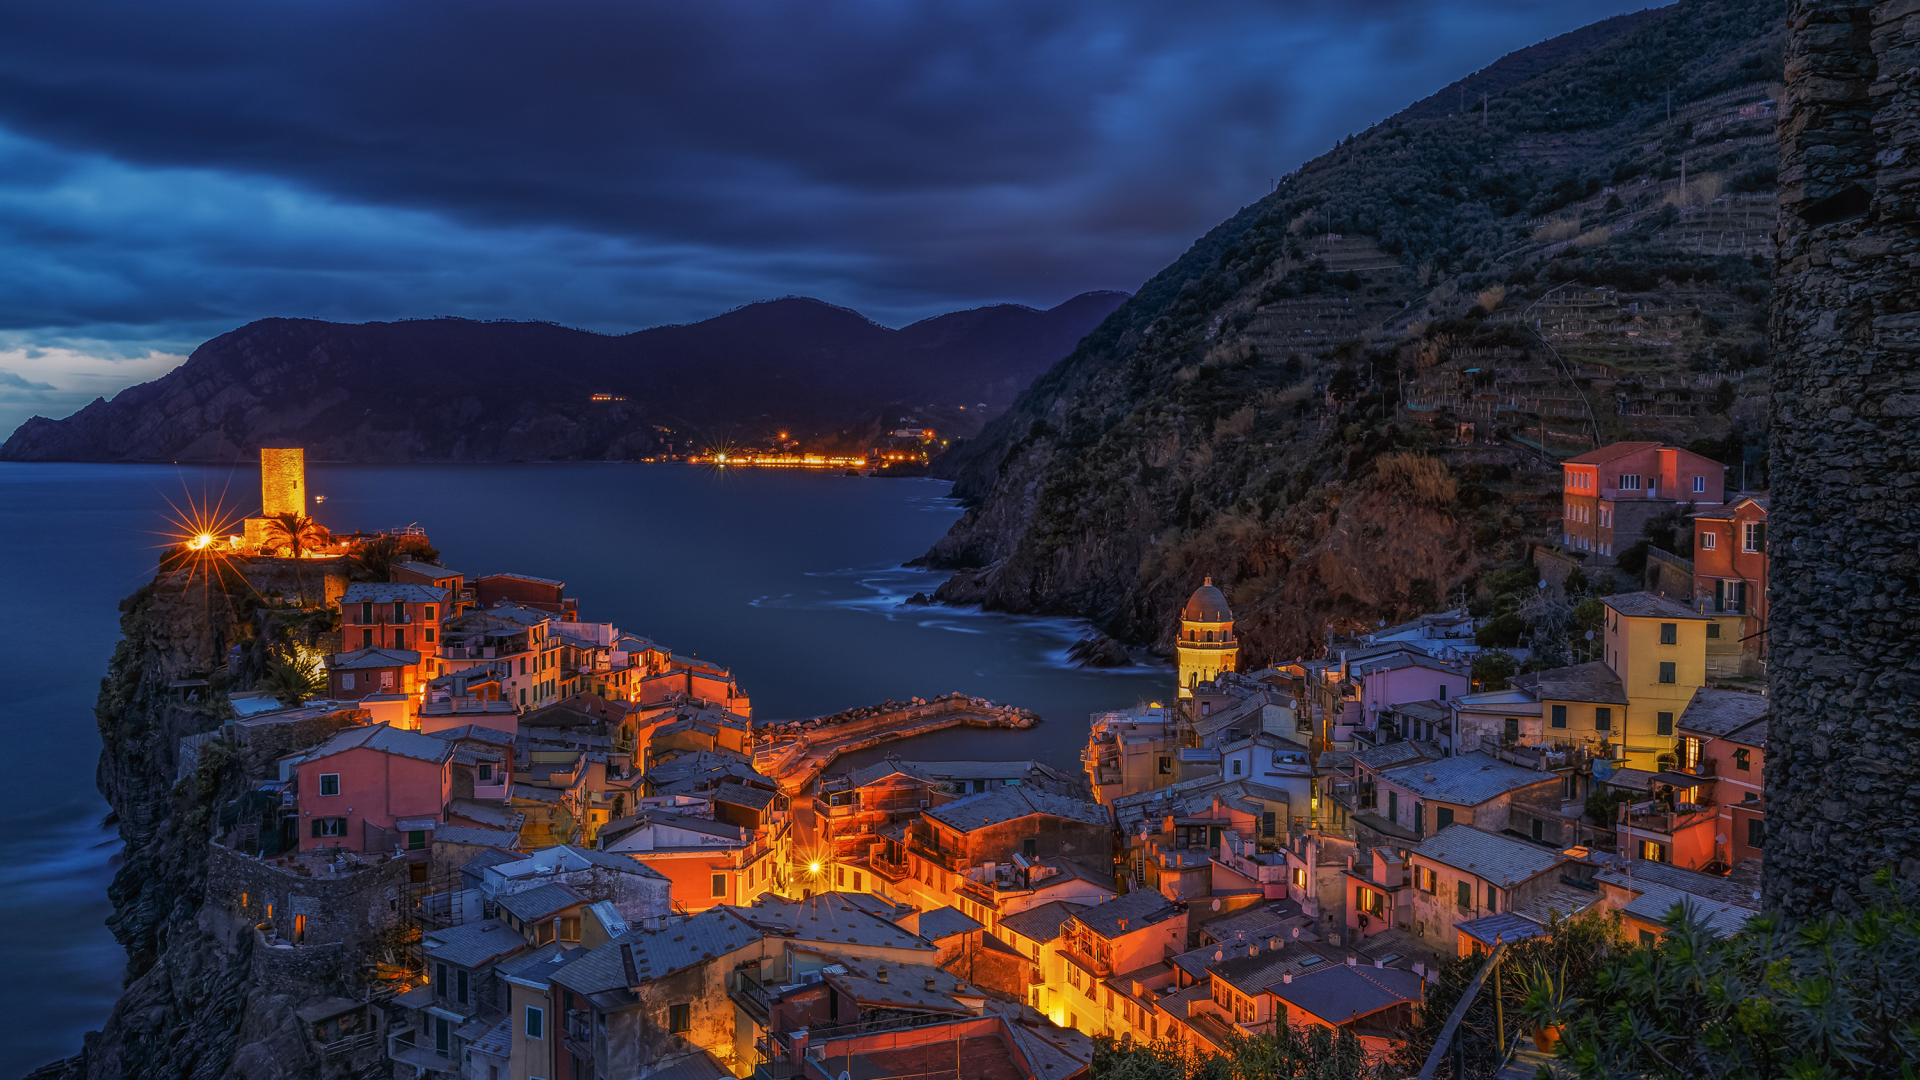 Architecture Building Old Building Vernazza Italy Village Cliff Mountains Sea Clouds Evening Lights  1920x1080